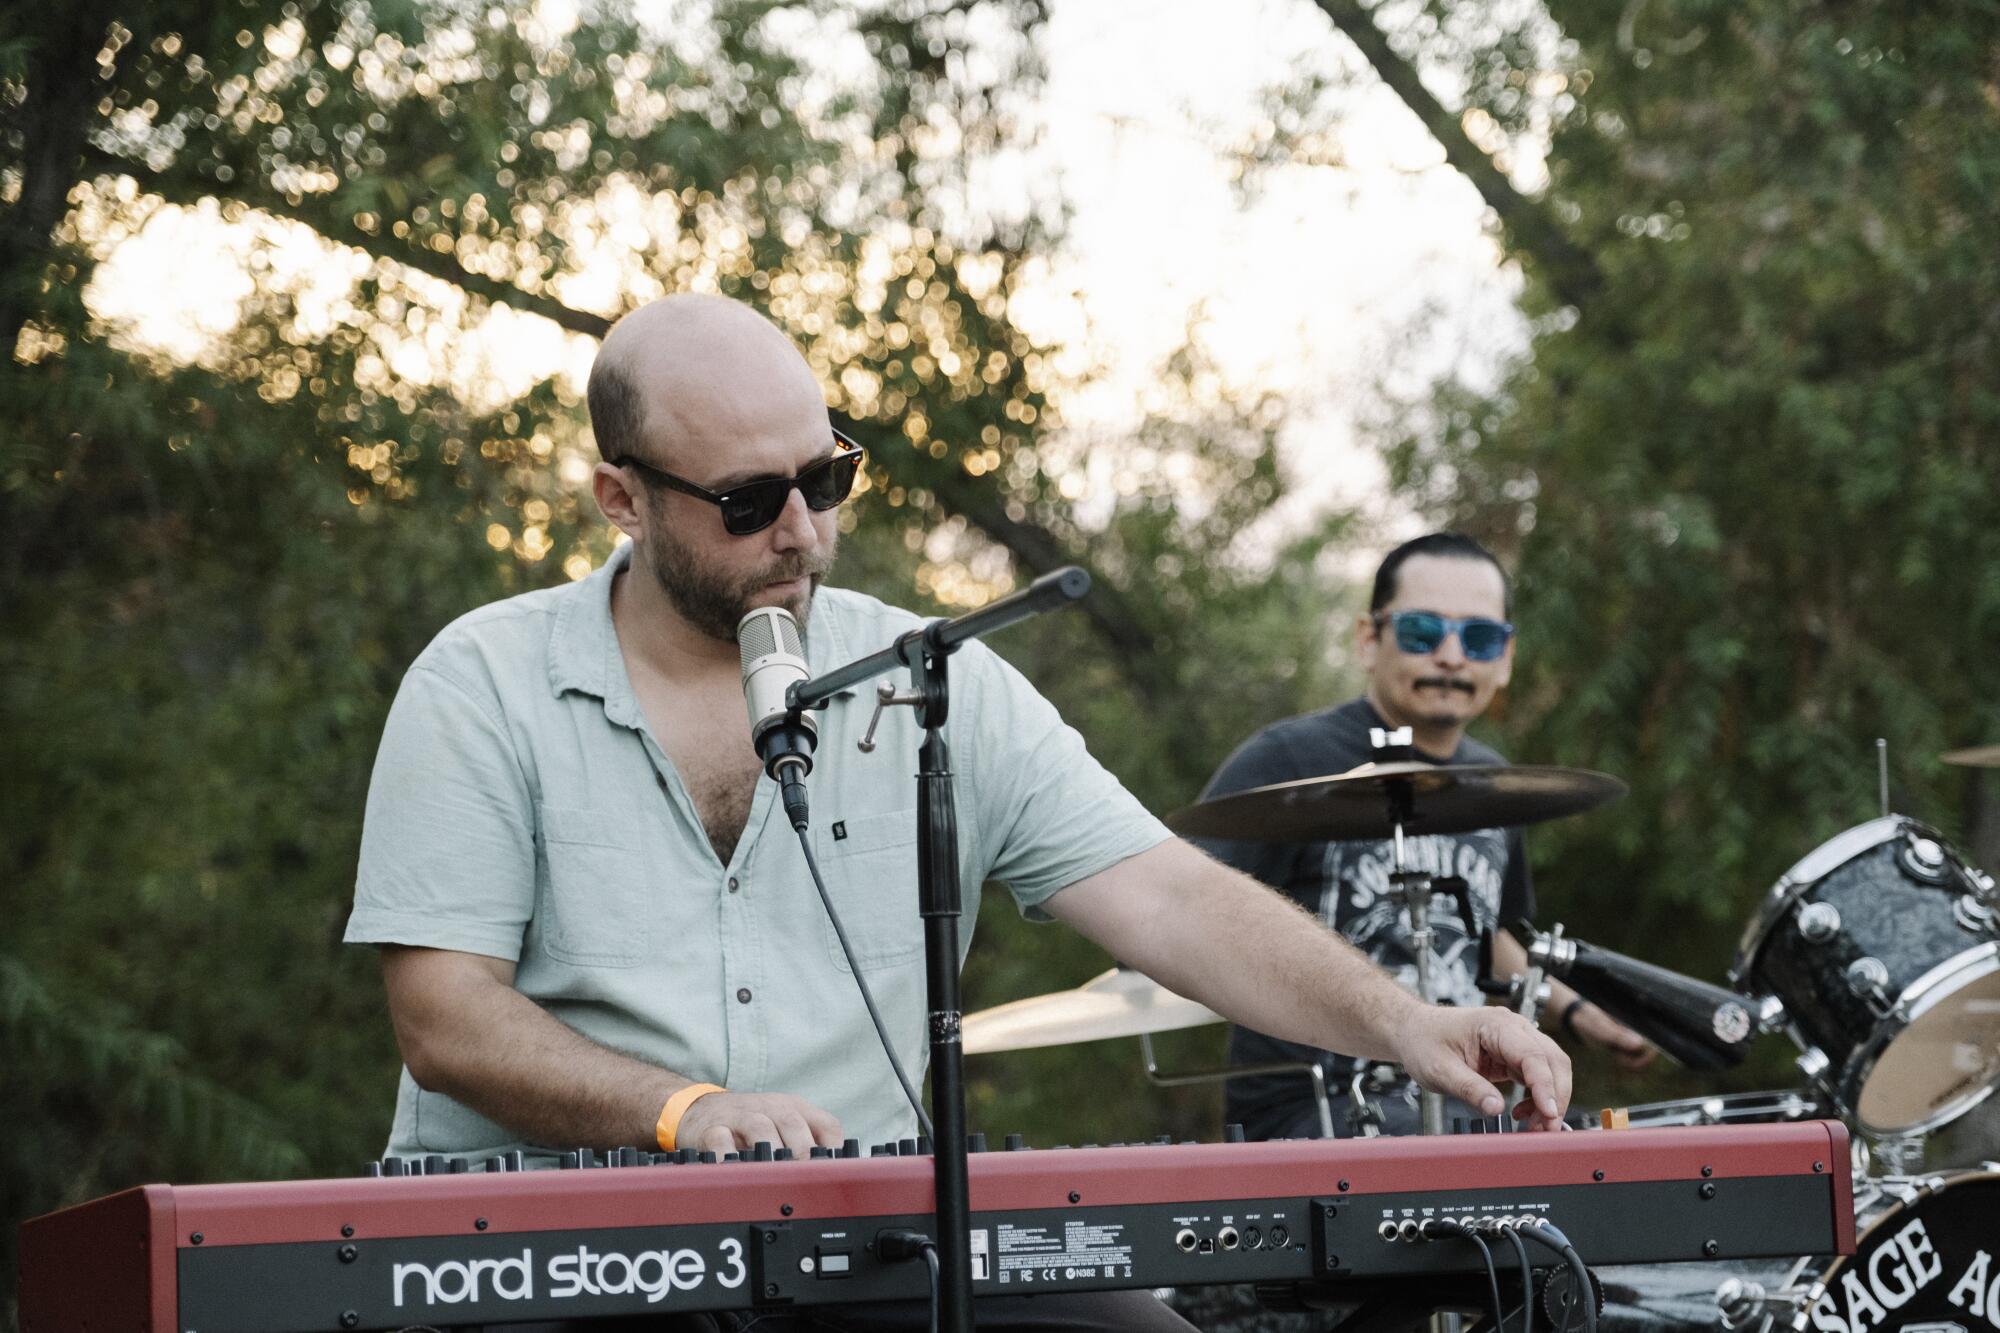  Sage Against the Machine co-founder Evan Meyer at his keyboard in an open-neck shirt and dark glasses.  